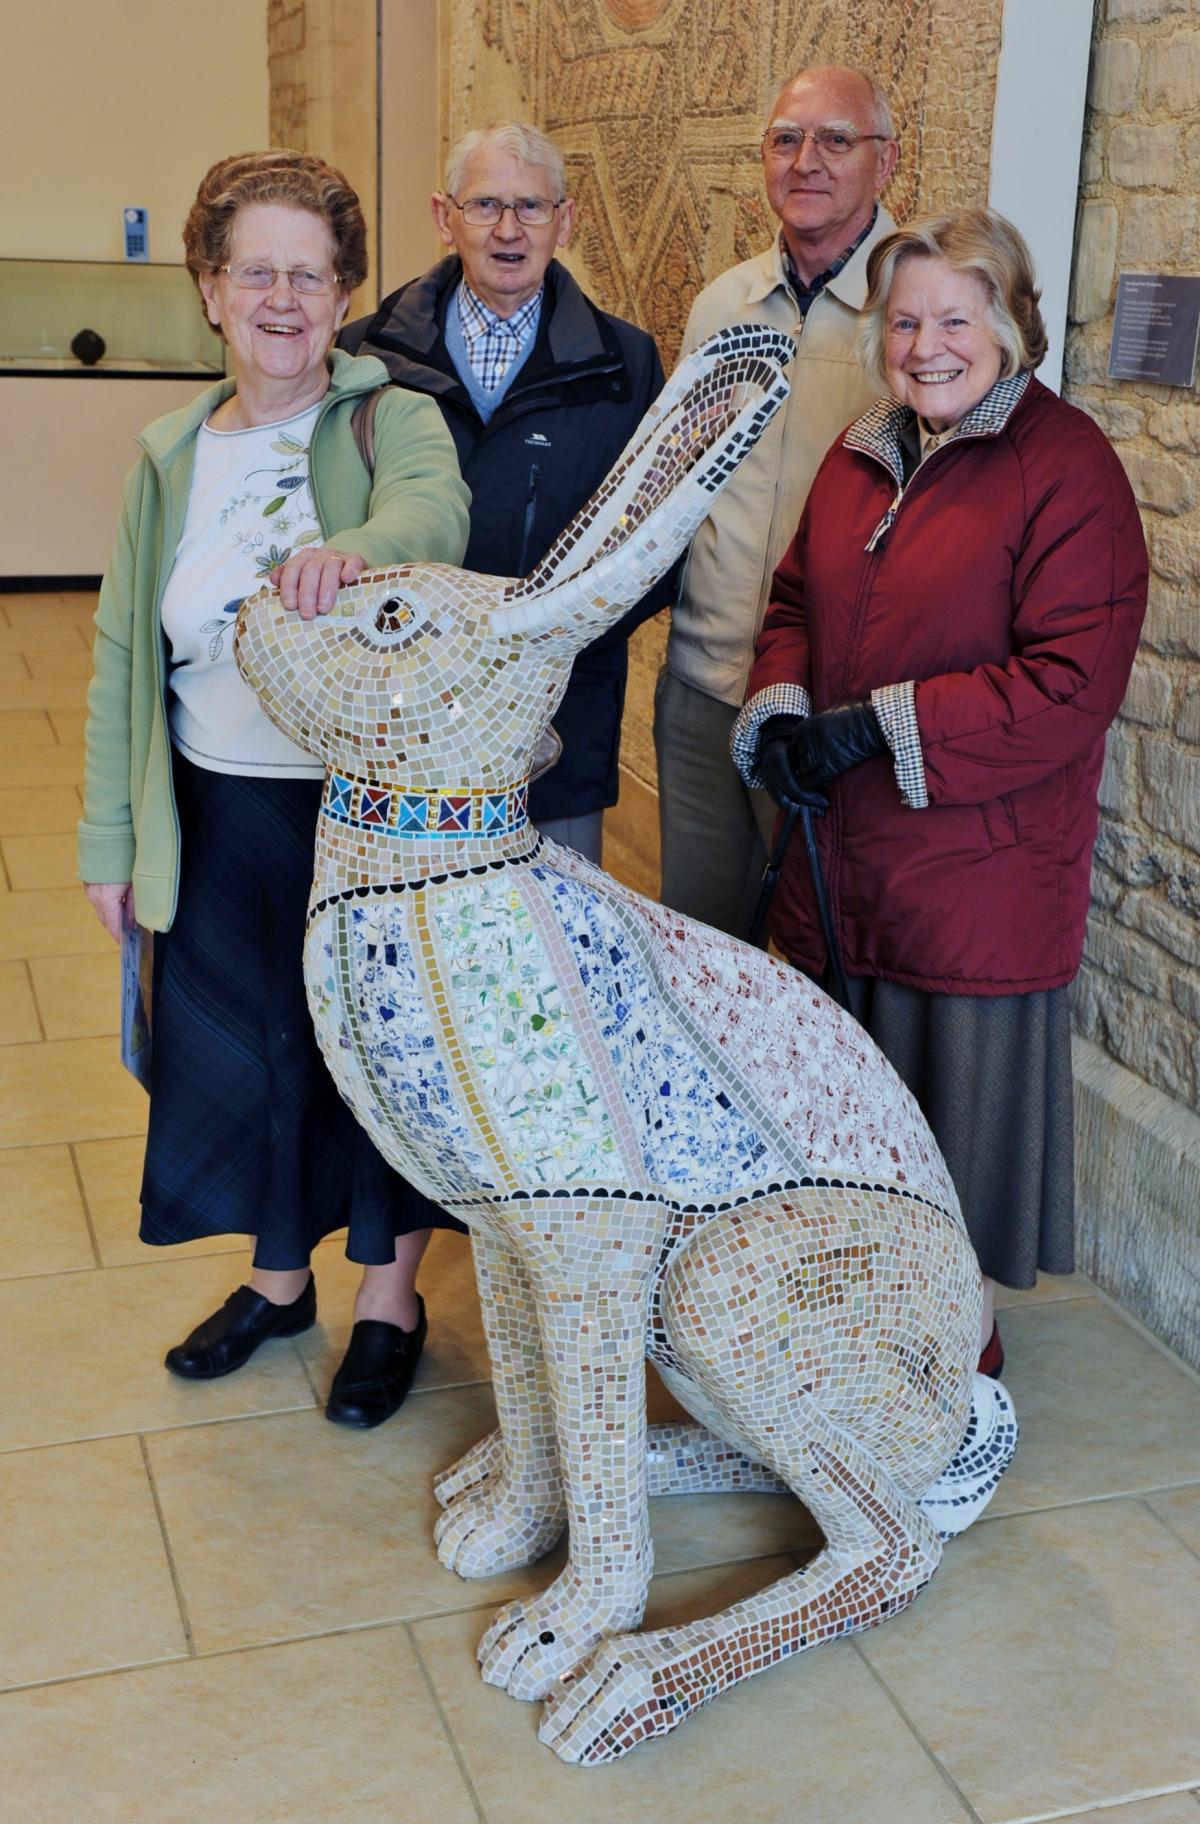 Cirencester visitors Joan and Phillip Bristow and Henry and Margaret McConnell take a look at Tess the hare by Erica Bibbings at the Corinium Museum, sponsored by BPE Solicitors